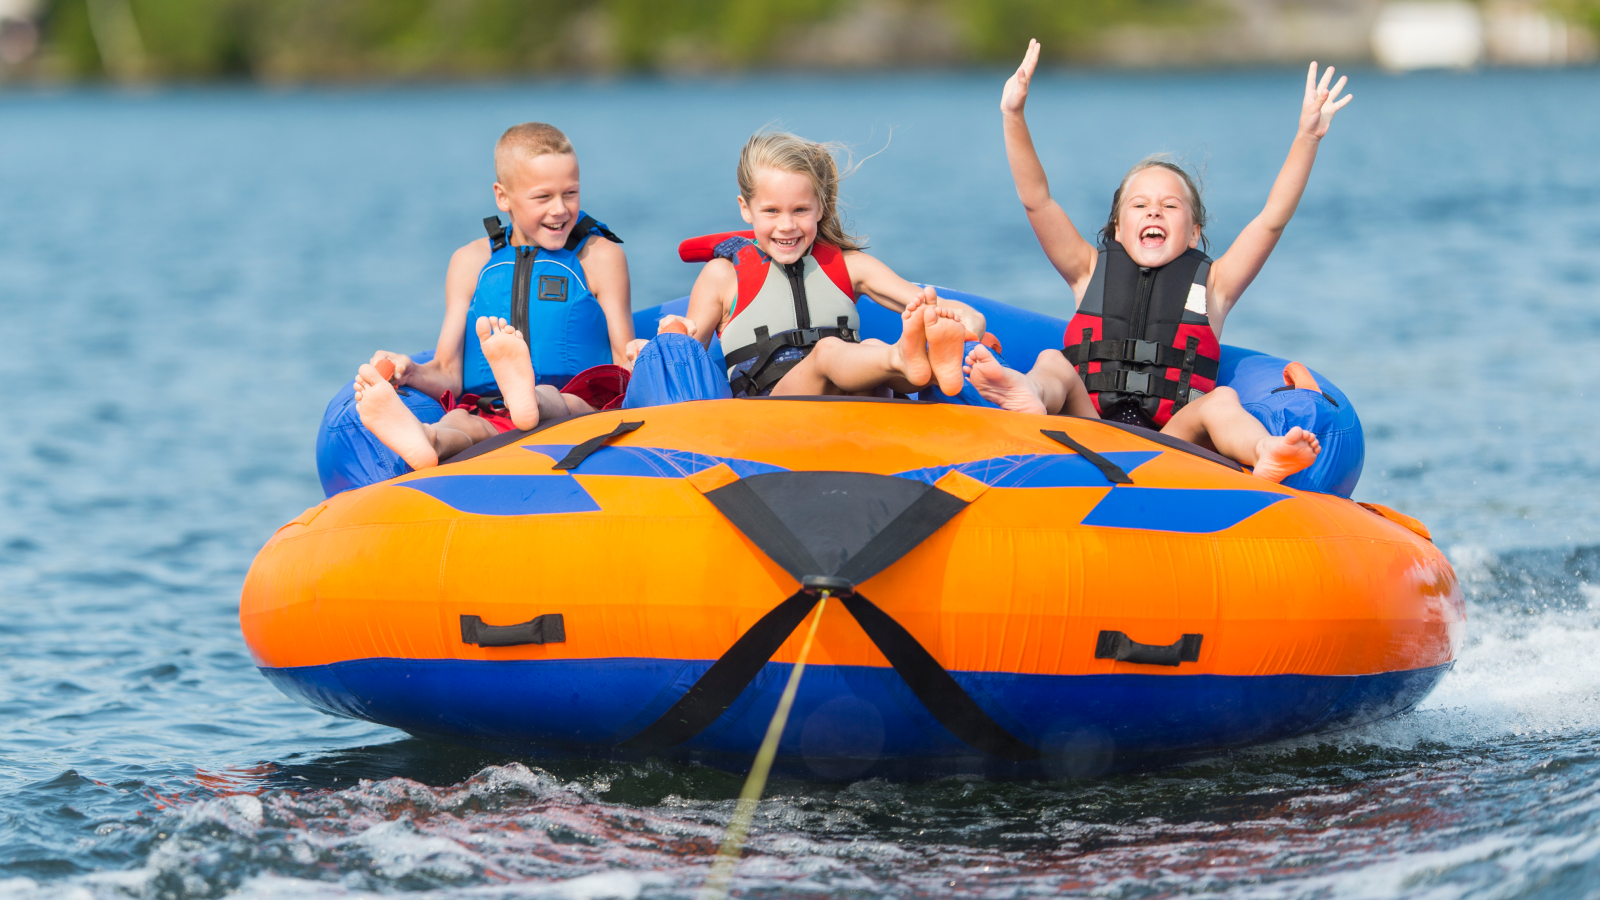 Three laughing children wearing life jackets on inner tube on a body of water